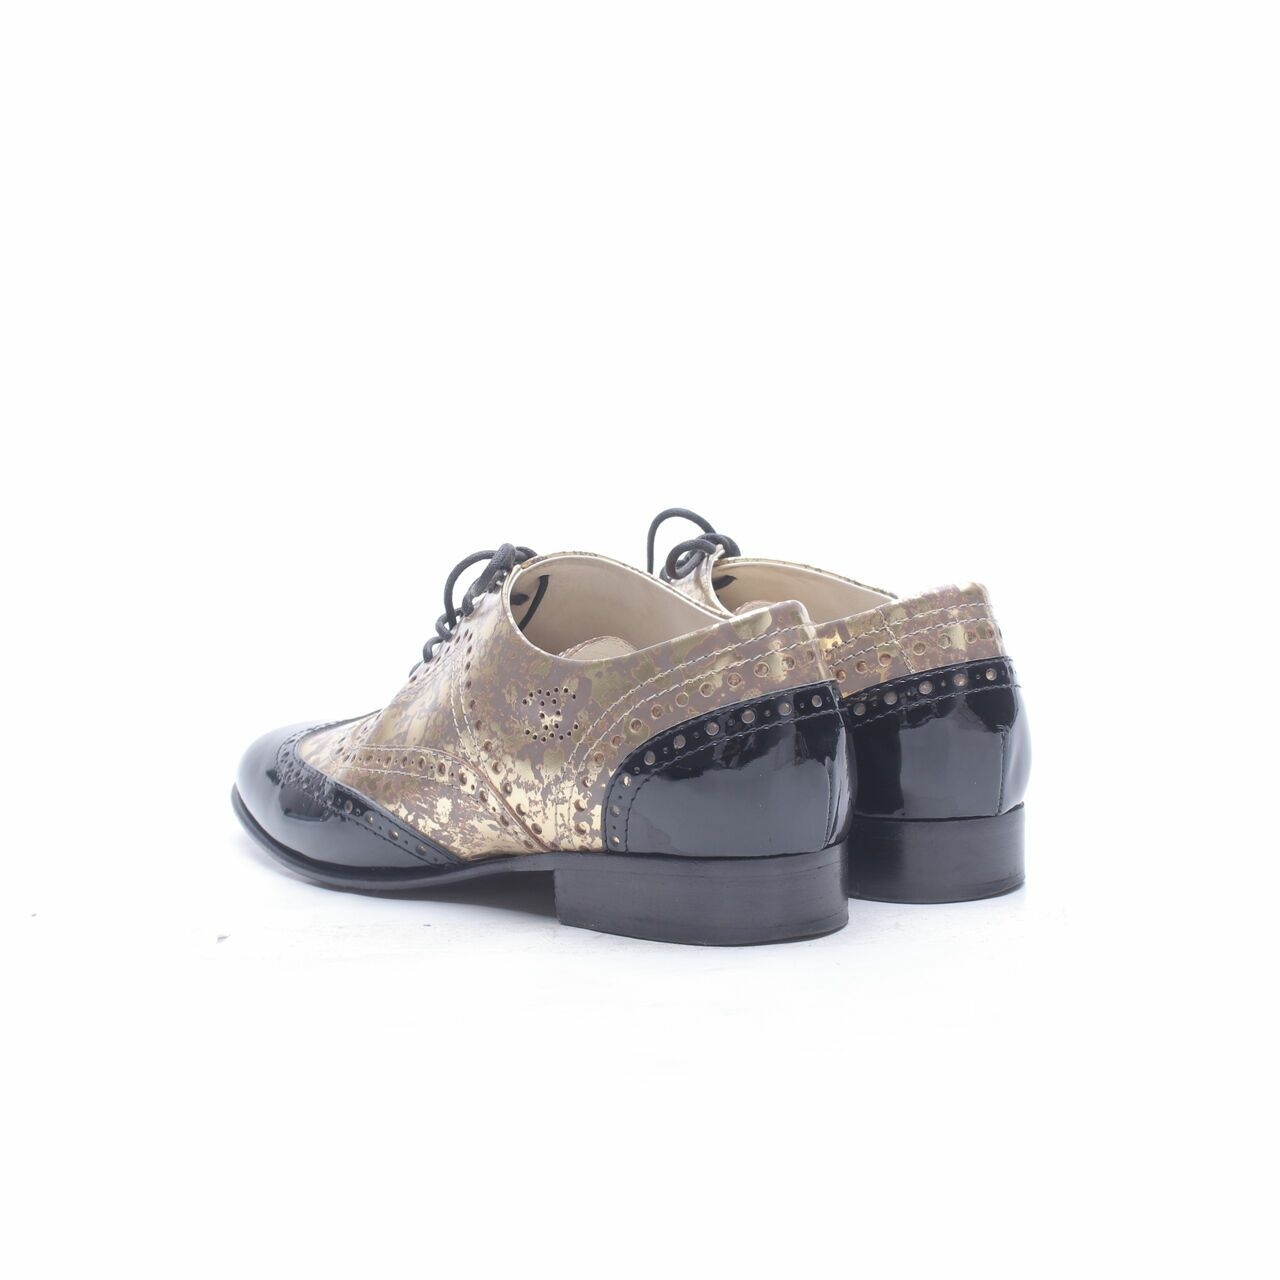  Chanel Metallic Gold And Black Patent Brogue Leather Lace-Up Oxford Flats 